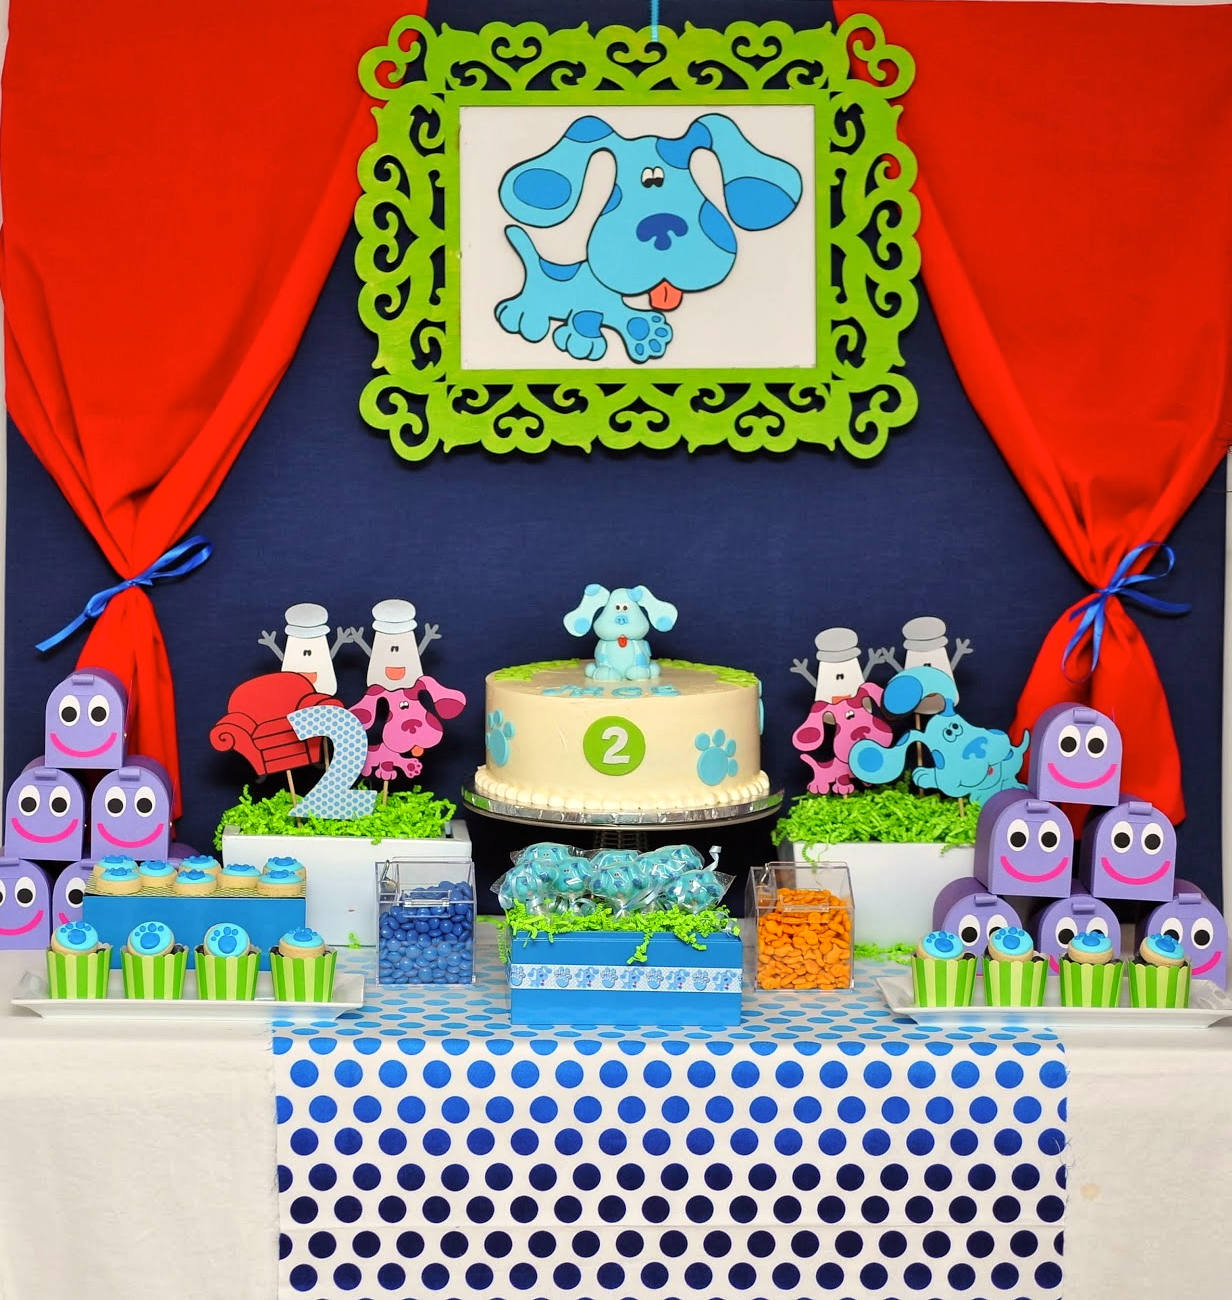 Blues Clues Birthday Party Decorations Blues Clues Birthday Party ...